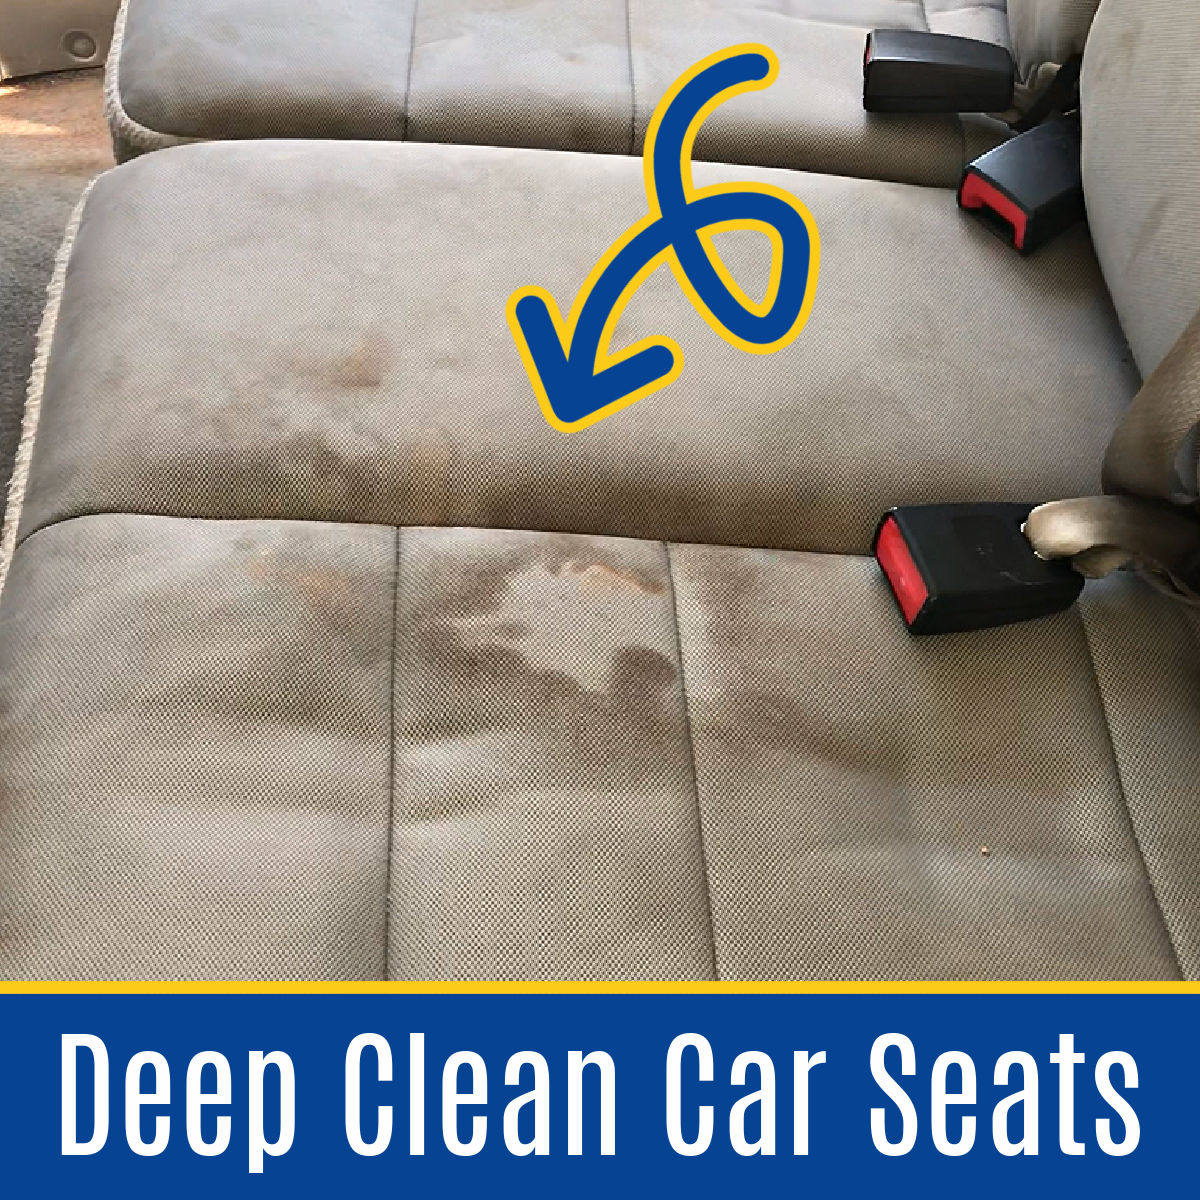 How To DEEP CLEAN Cloth Car Seats The Right Way And Remove Stains and Dirt  